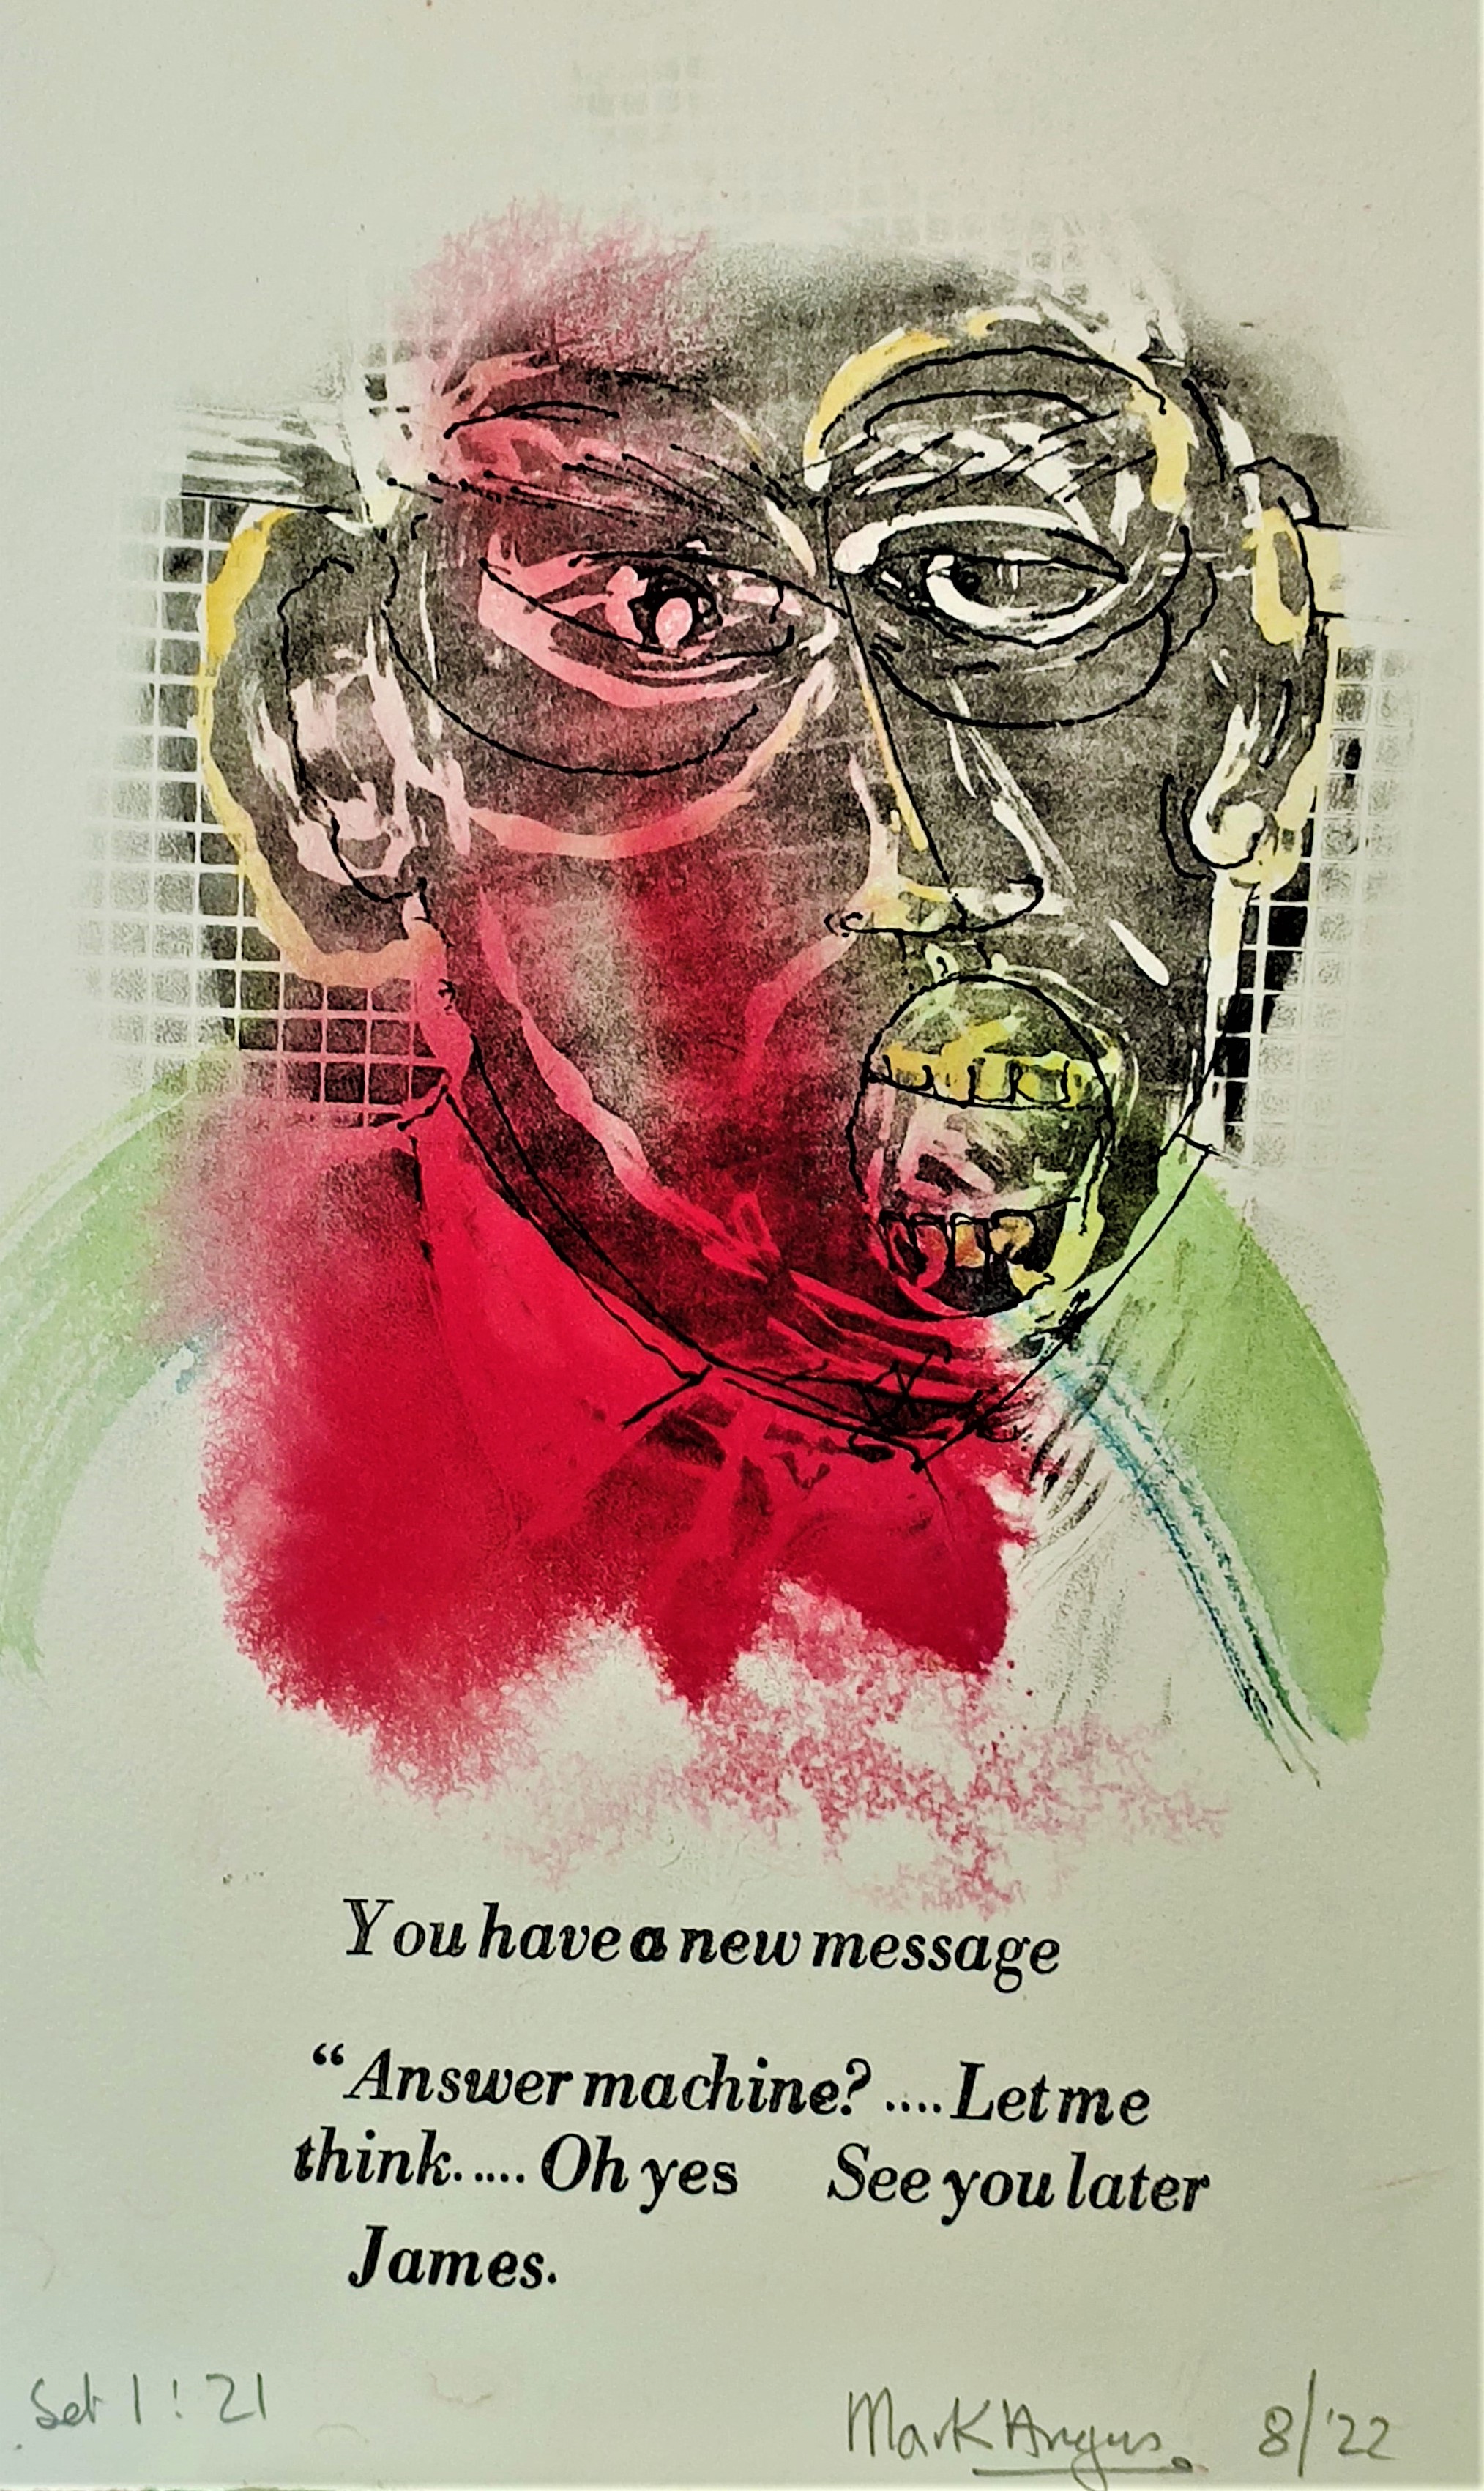 You have a new message Set 1 - 21 Vitreography and text